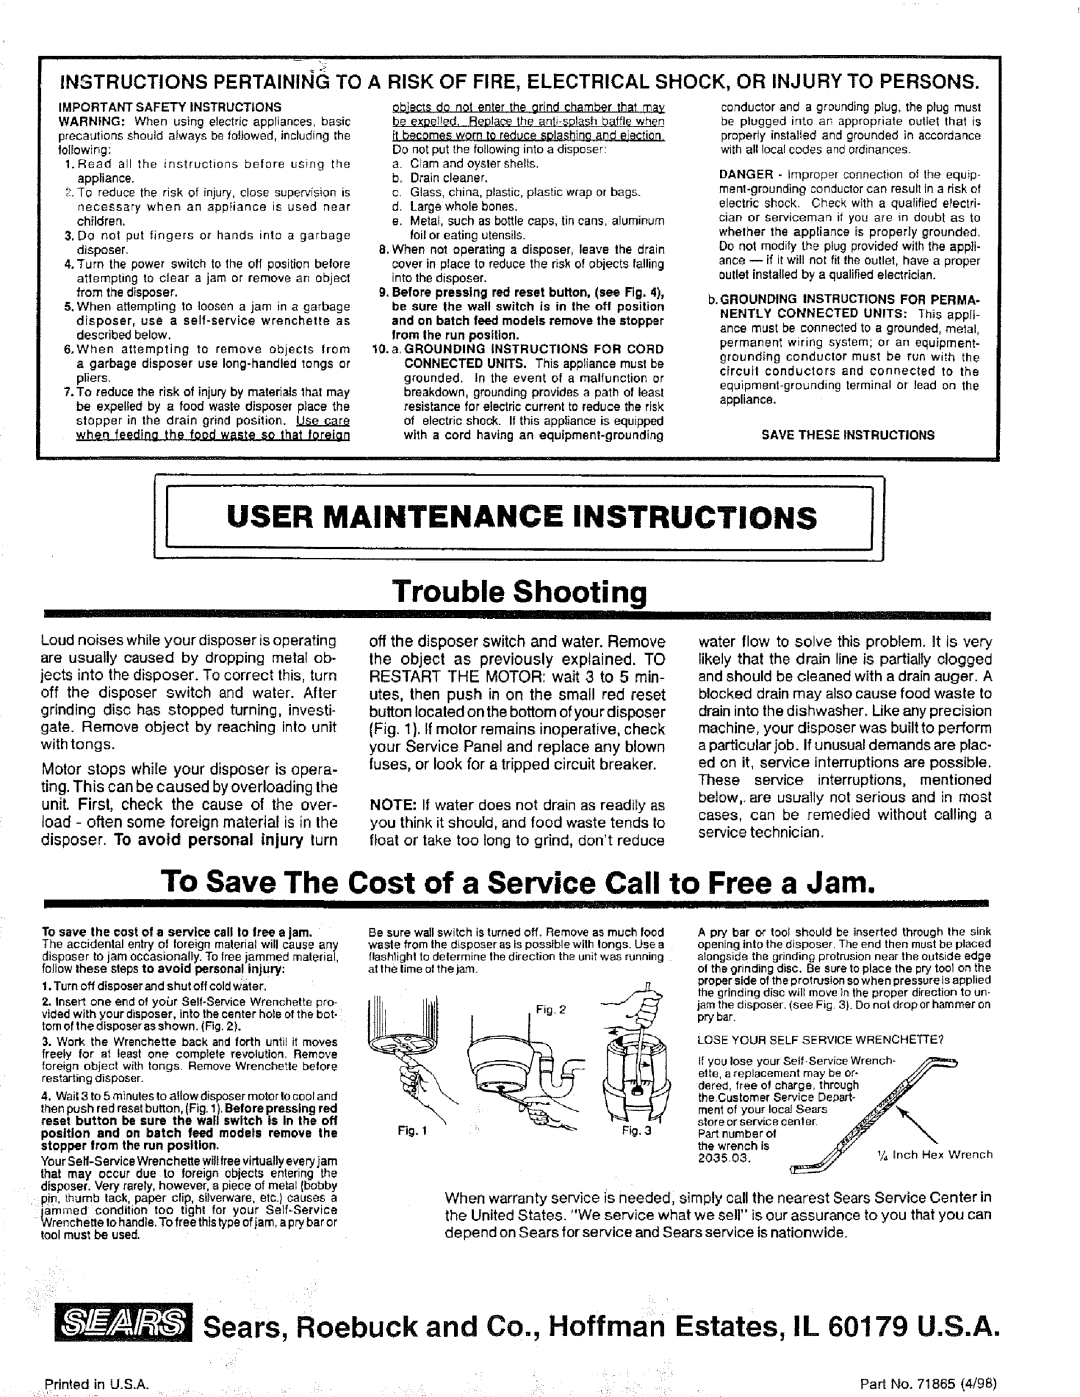 Kenmore 17568563 manual To Save The Cost of a Service Call to Free a Jam, User Maintenance Instructions, Trouble Shooting 